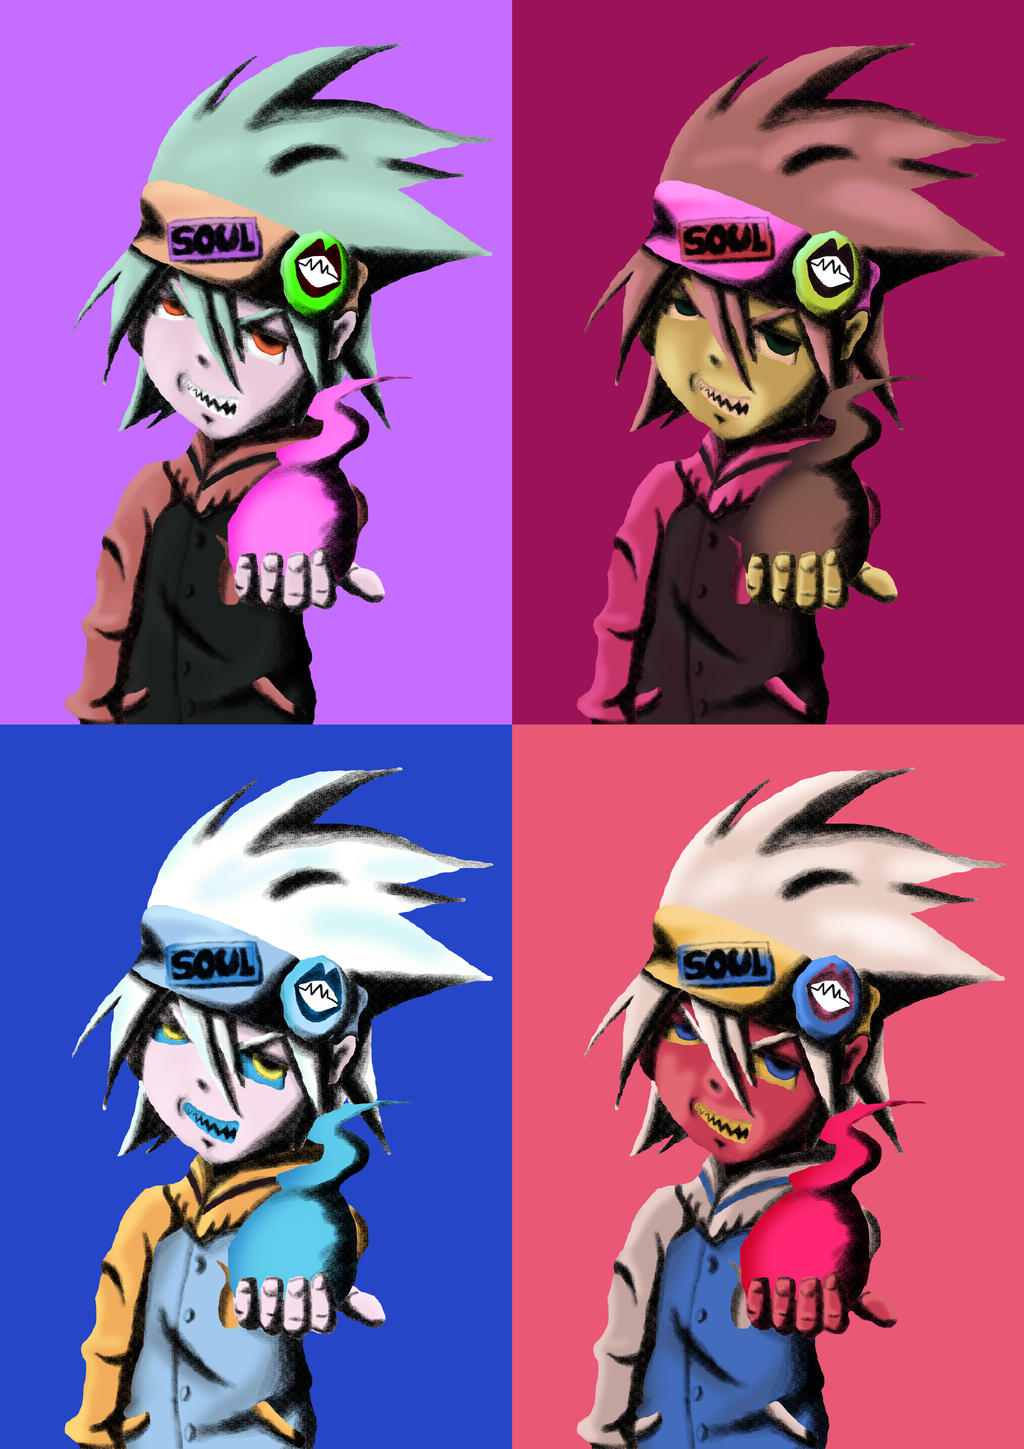 Soul Eater Andy Warhol's Style by Iloveyoukisshu on